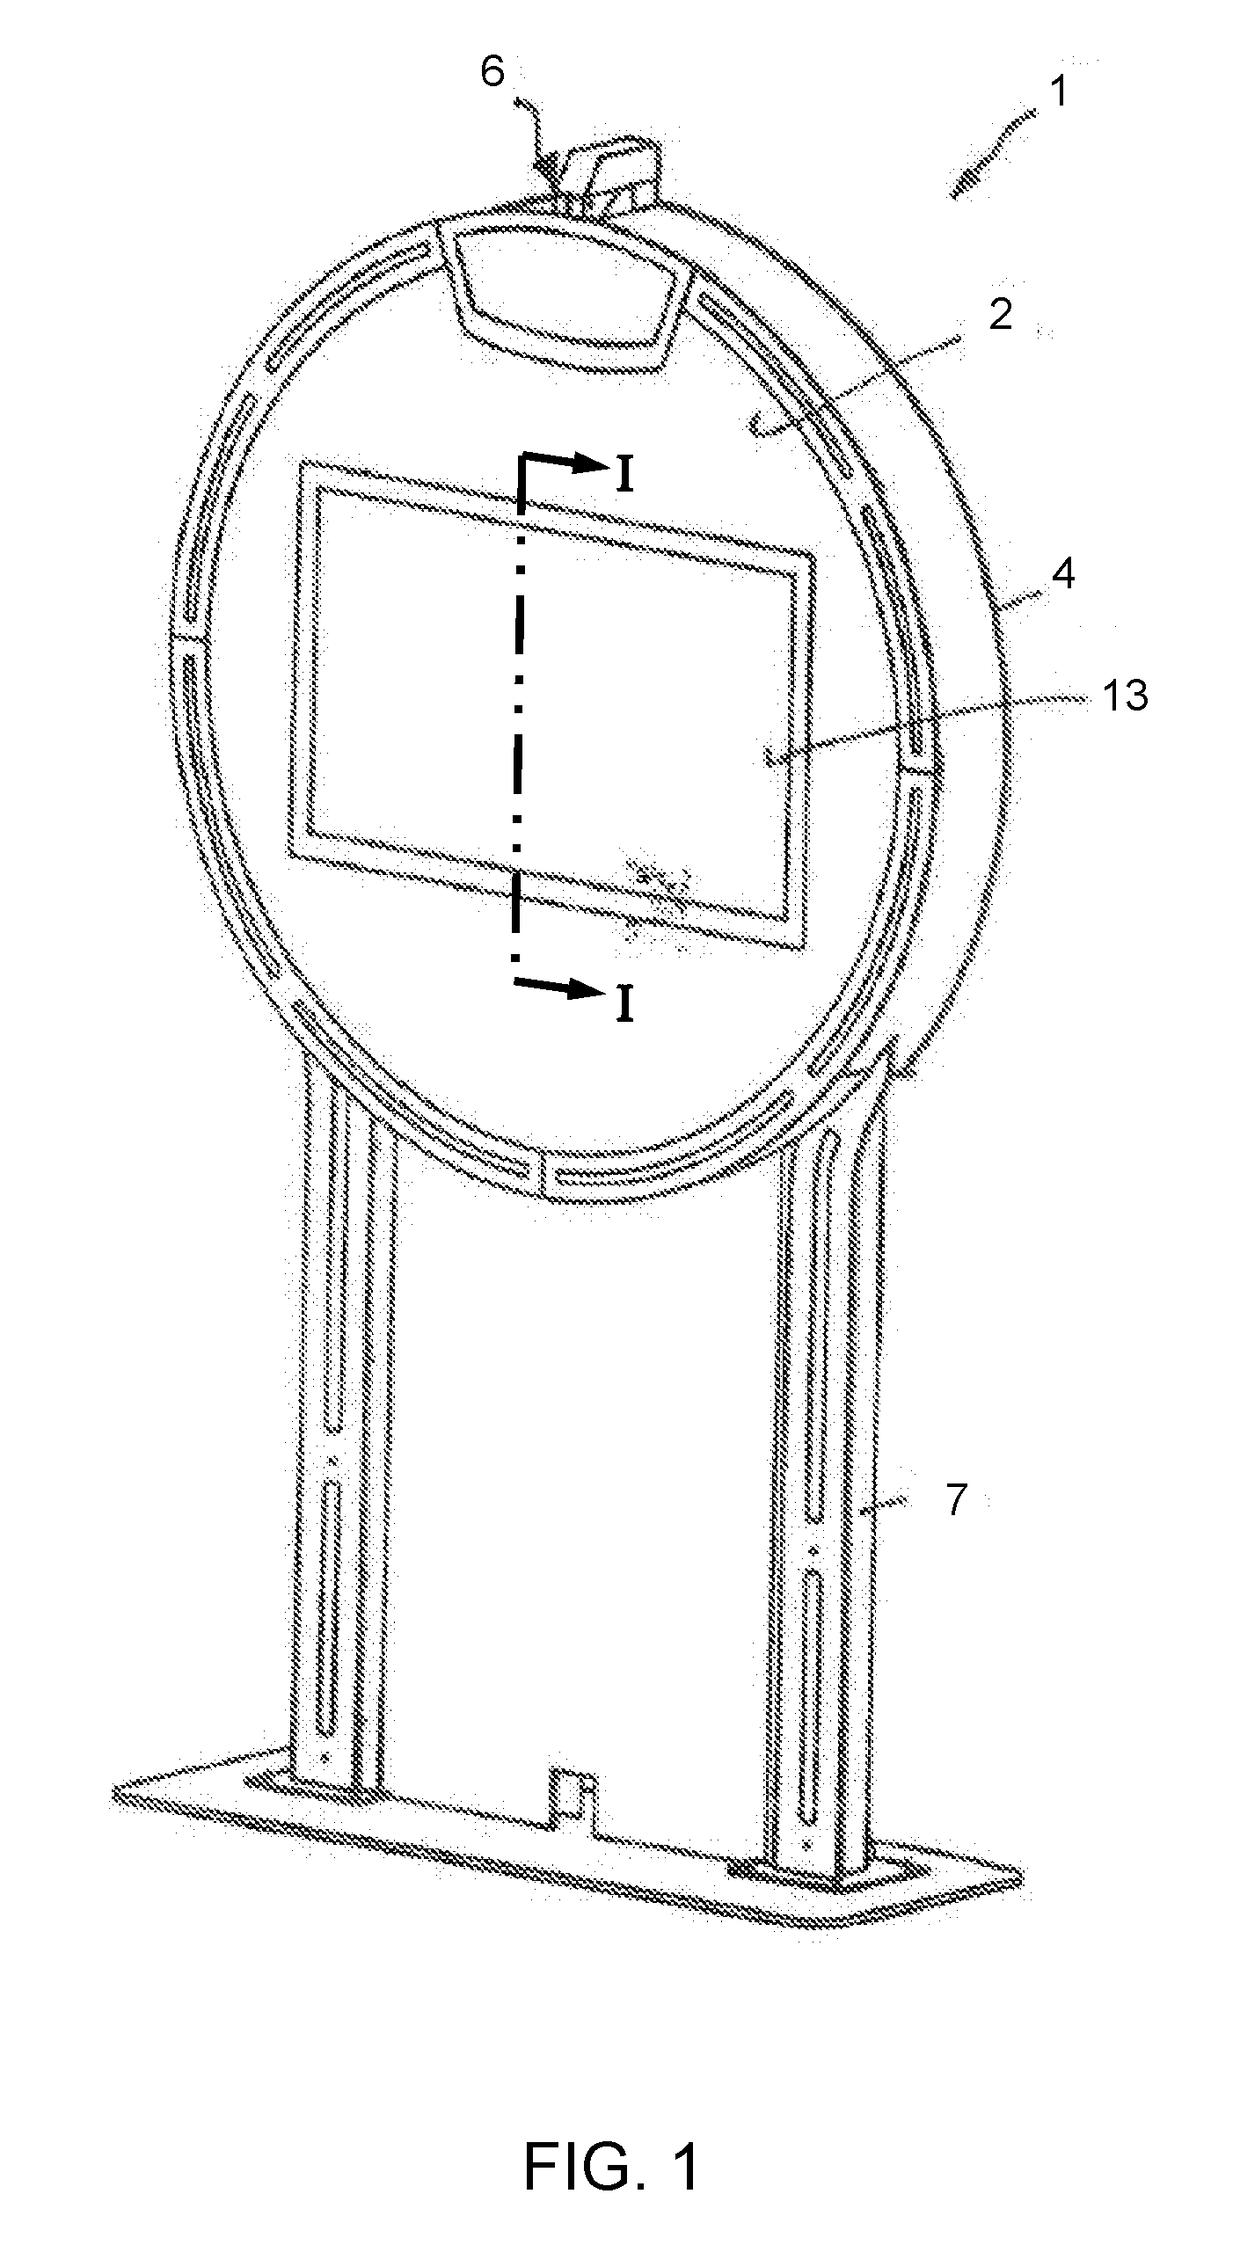 Gaming device comprising a rotatable game wheel